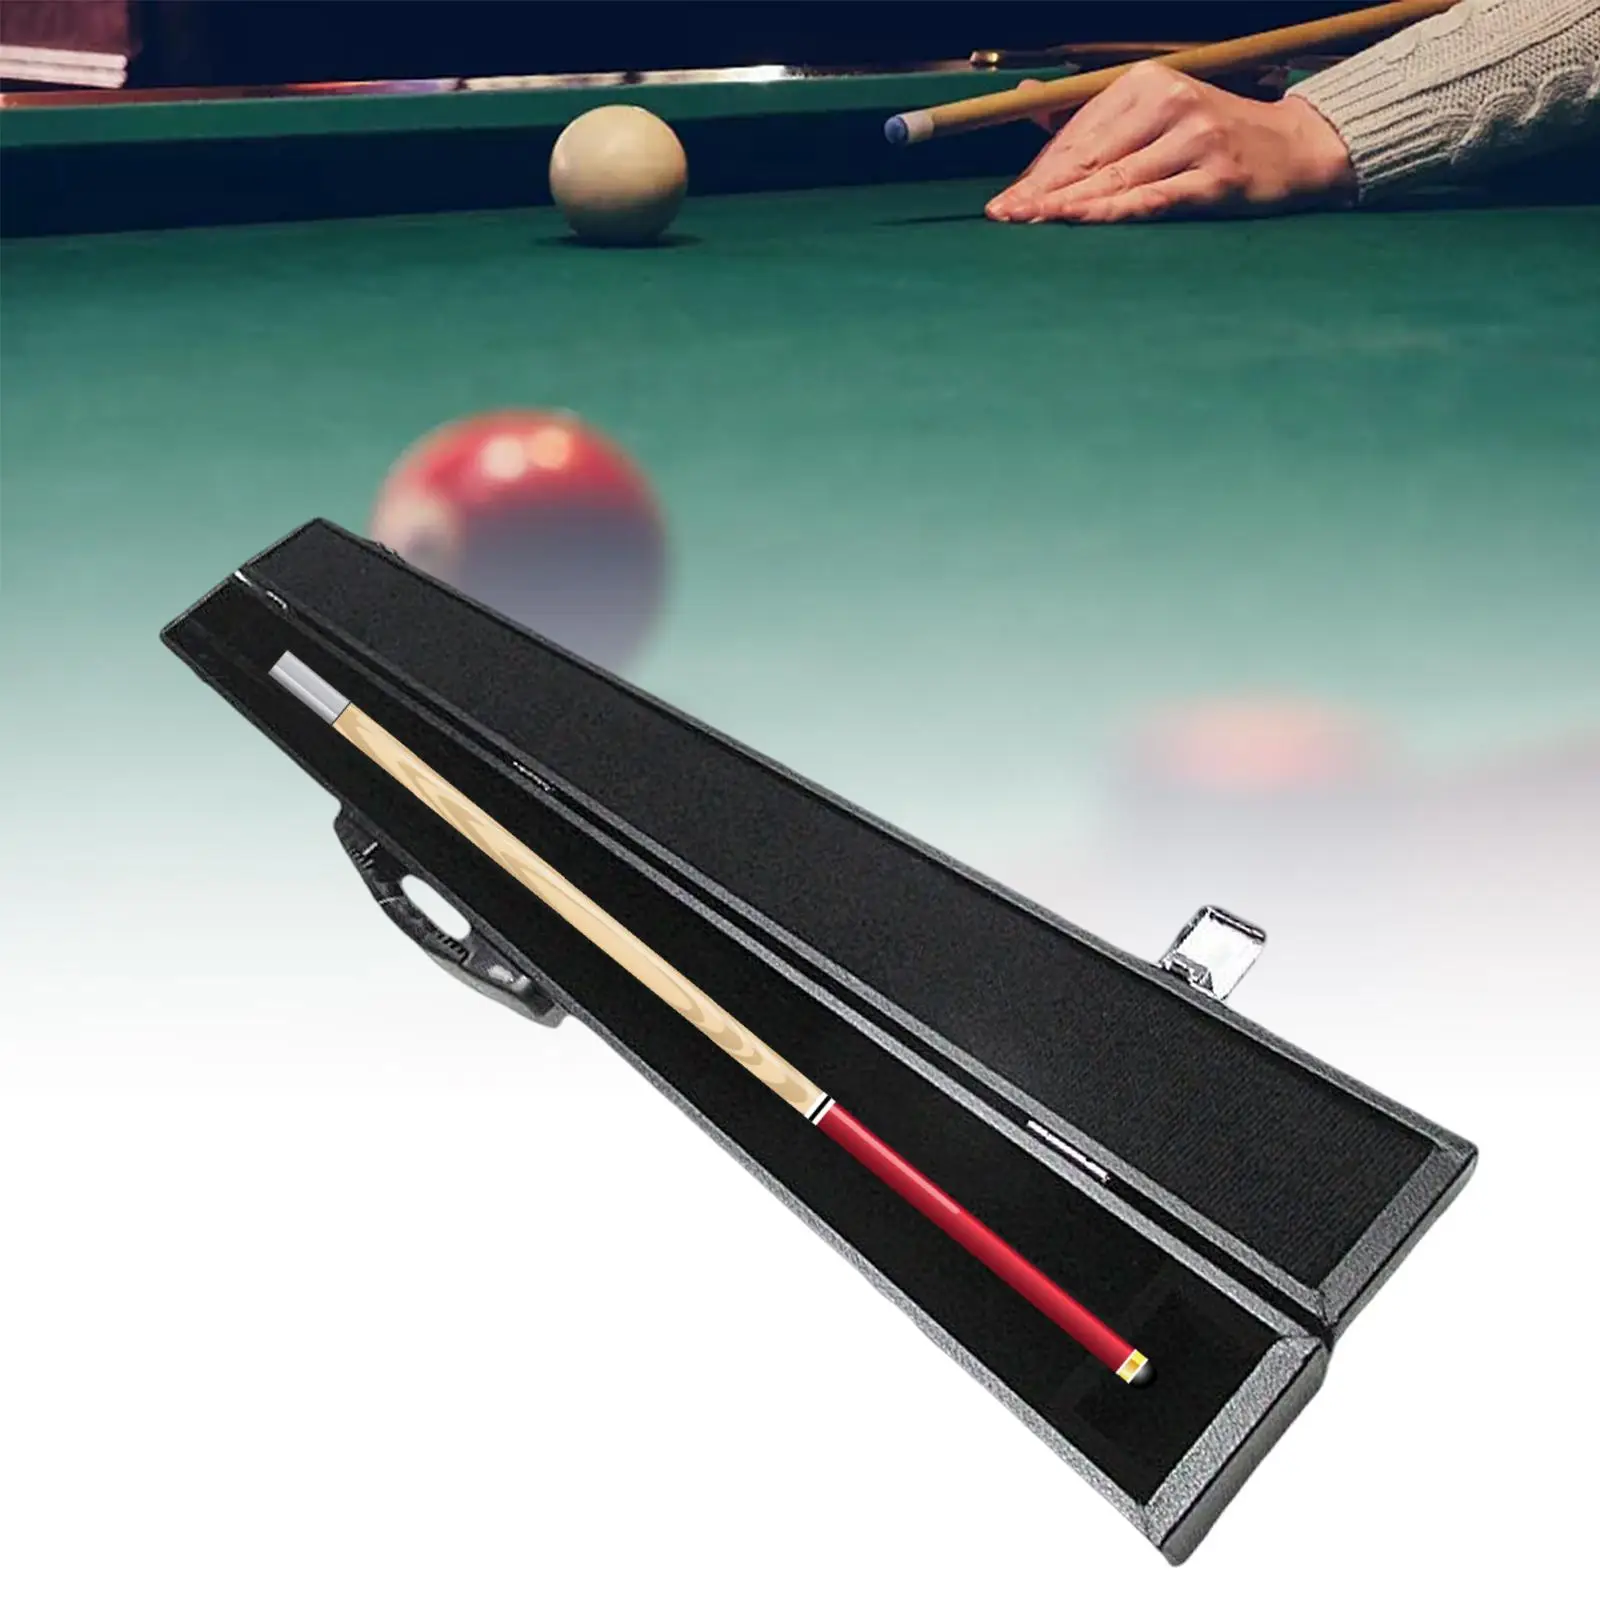 Billiard Case Carrying Case Hard Case Holds Two Piece Pool Billiards Supplies